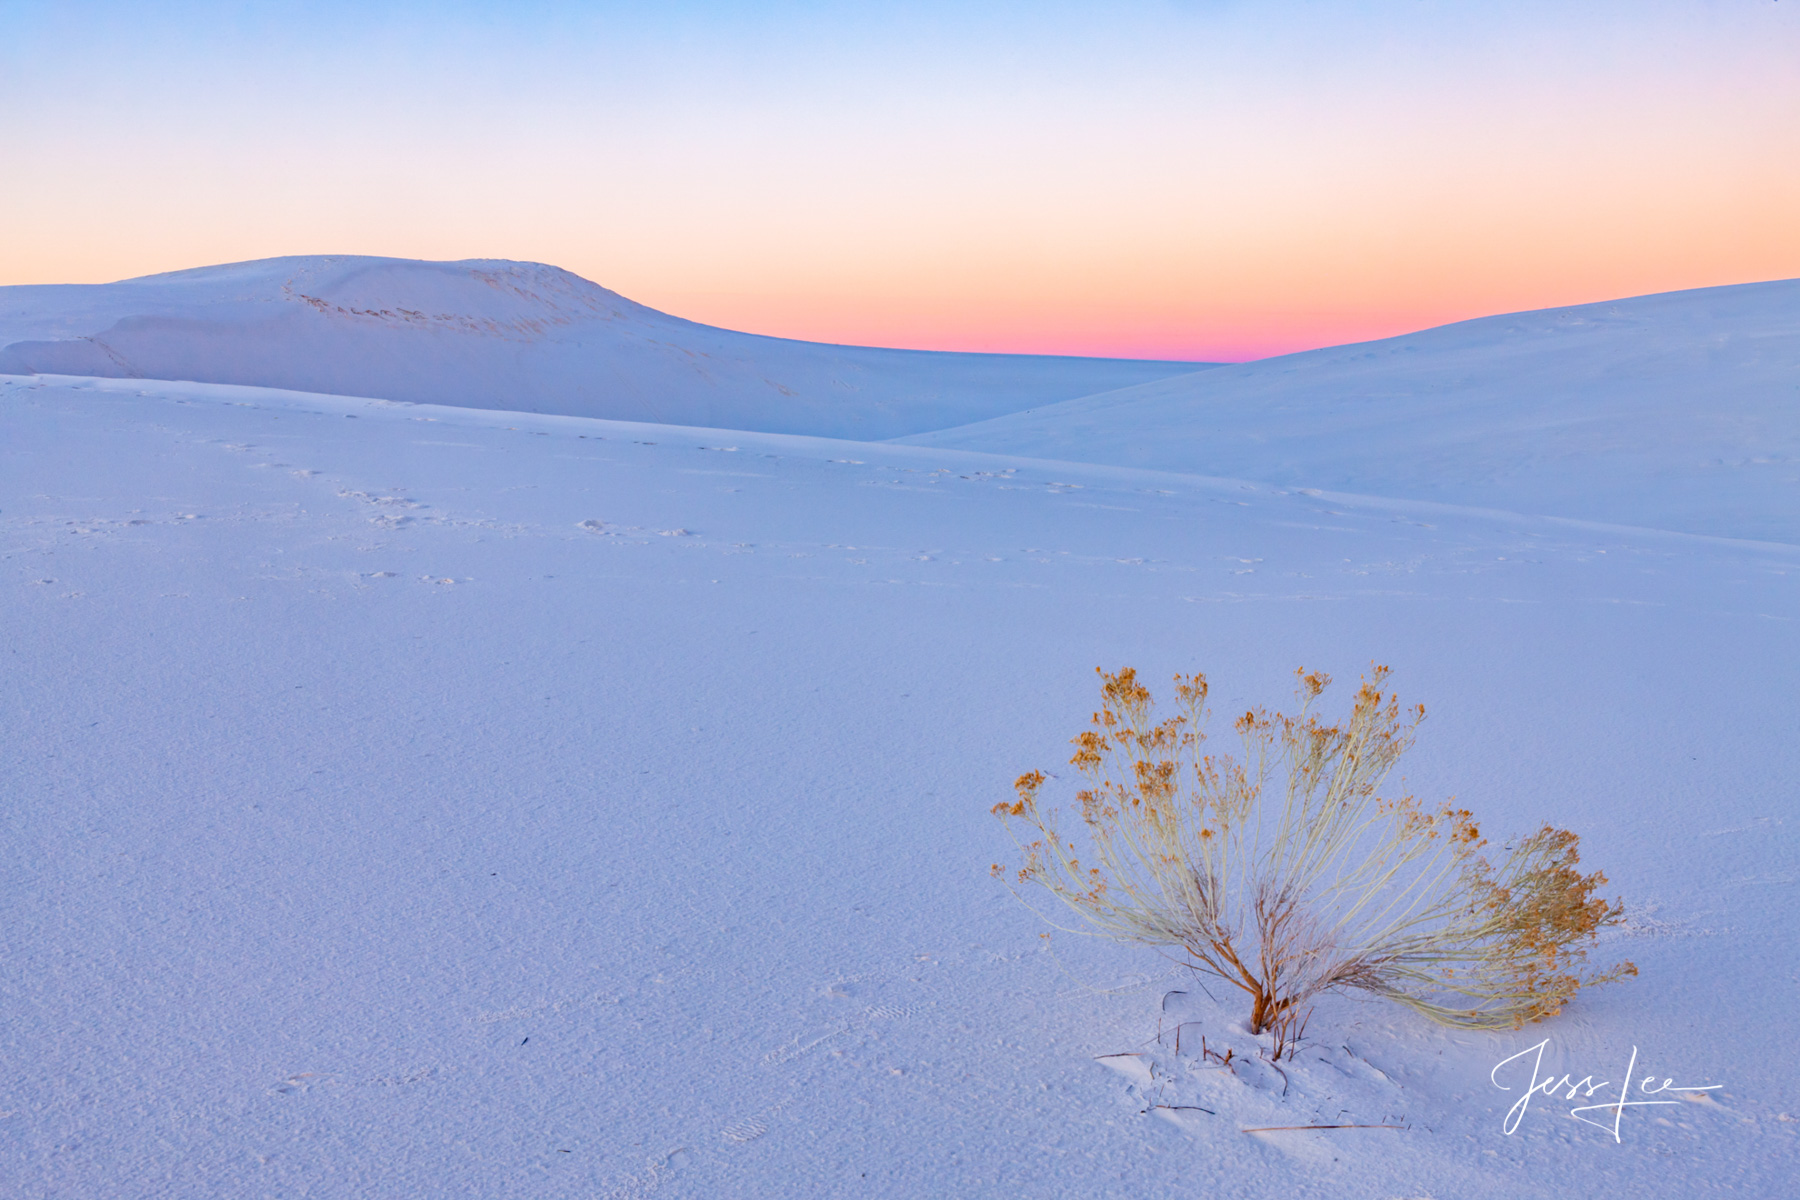 Fine Art Photography of Whites Sands Gypsum Desert The park's primary feature is the field of white sand dunes composed of gypsum...